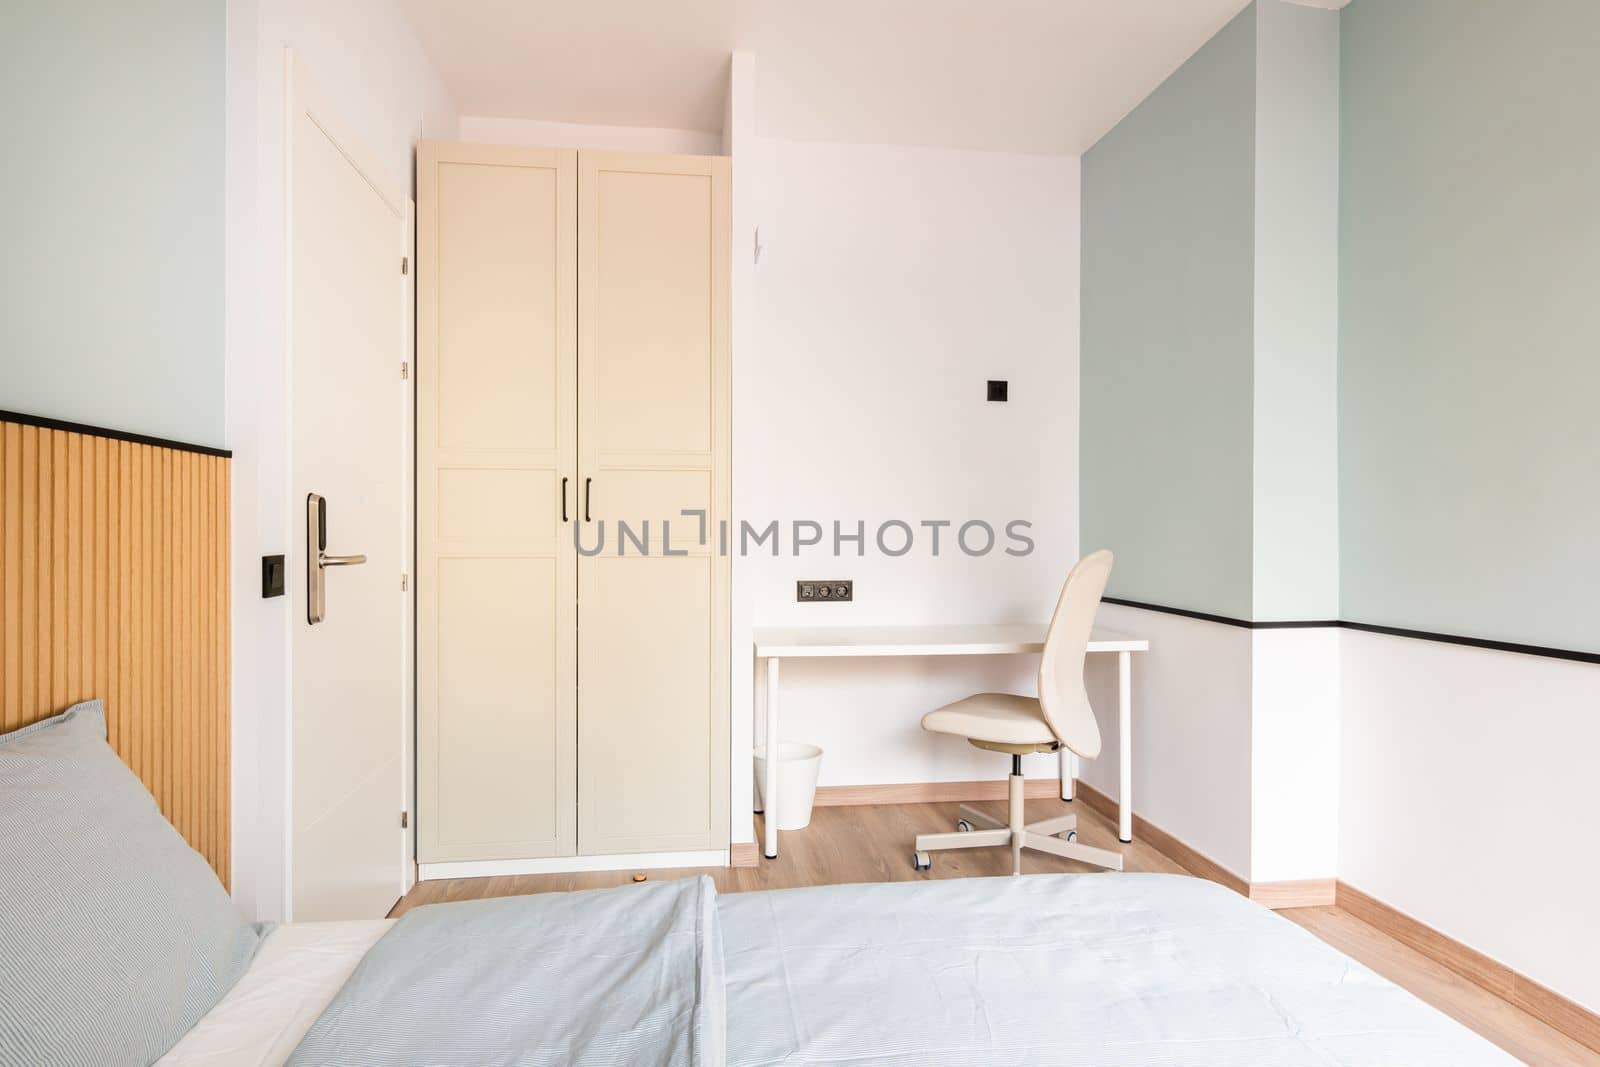 A bright room with walls in a soft mint color, a bed for two people, a work area with a table and a chair, a wardrobe with beige wooden doors. Door with electronic combination lock